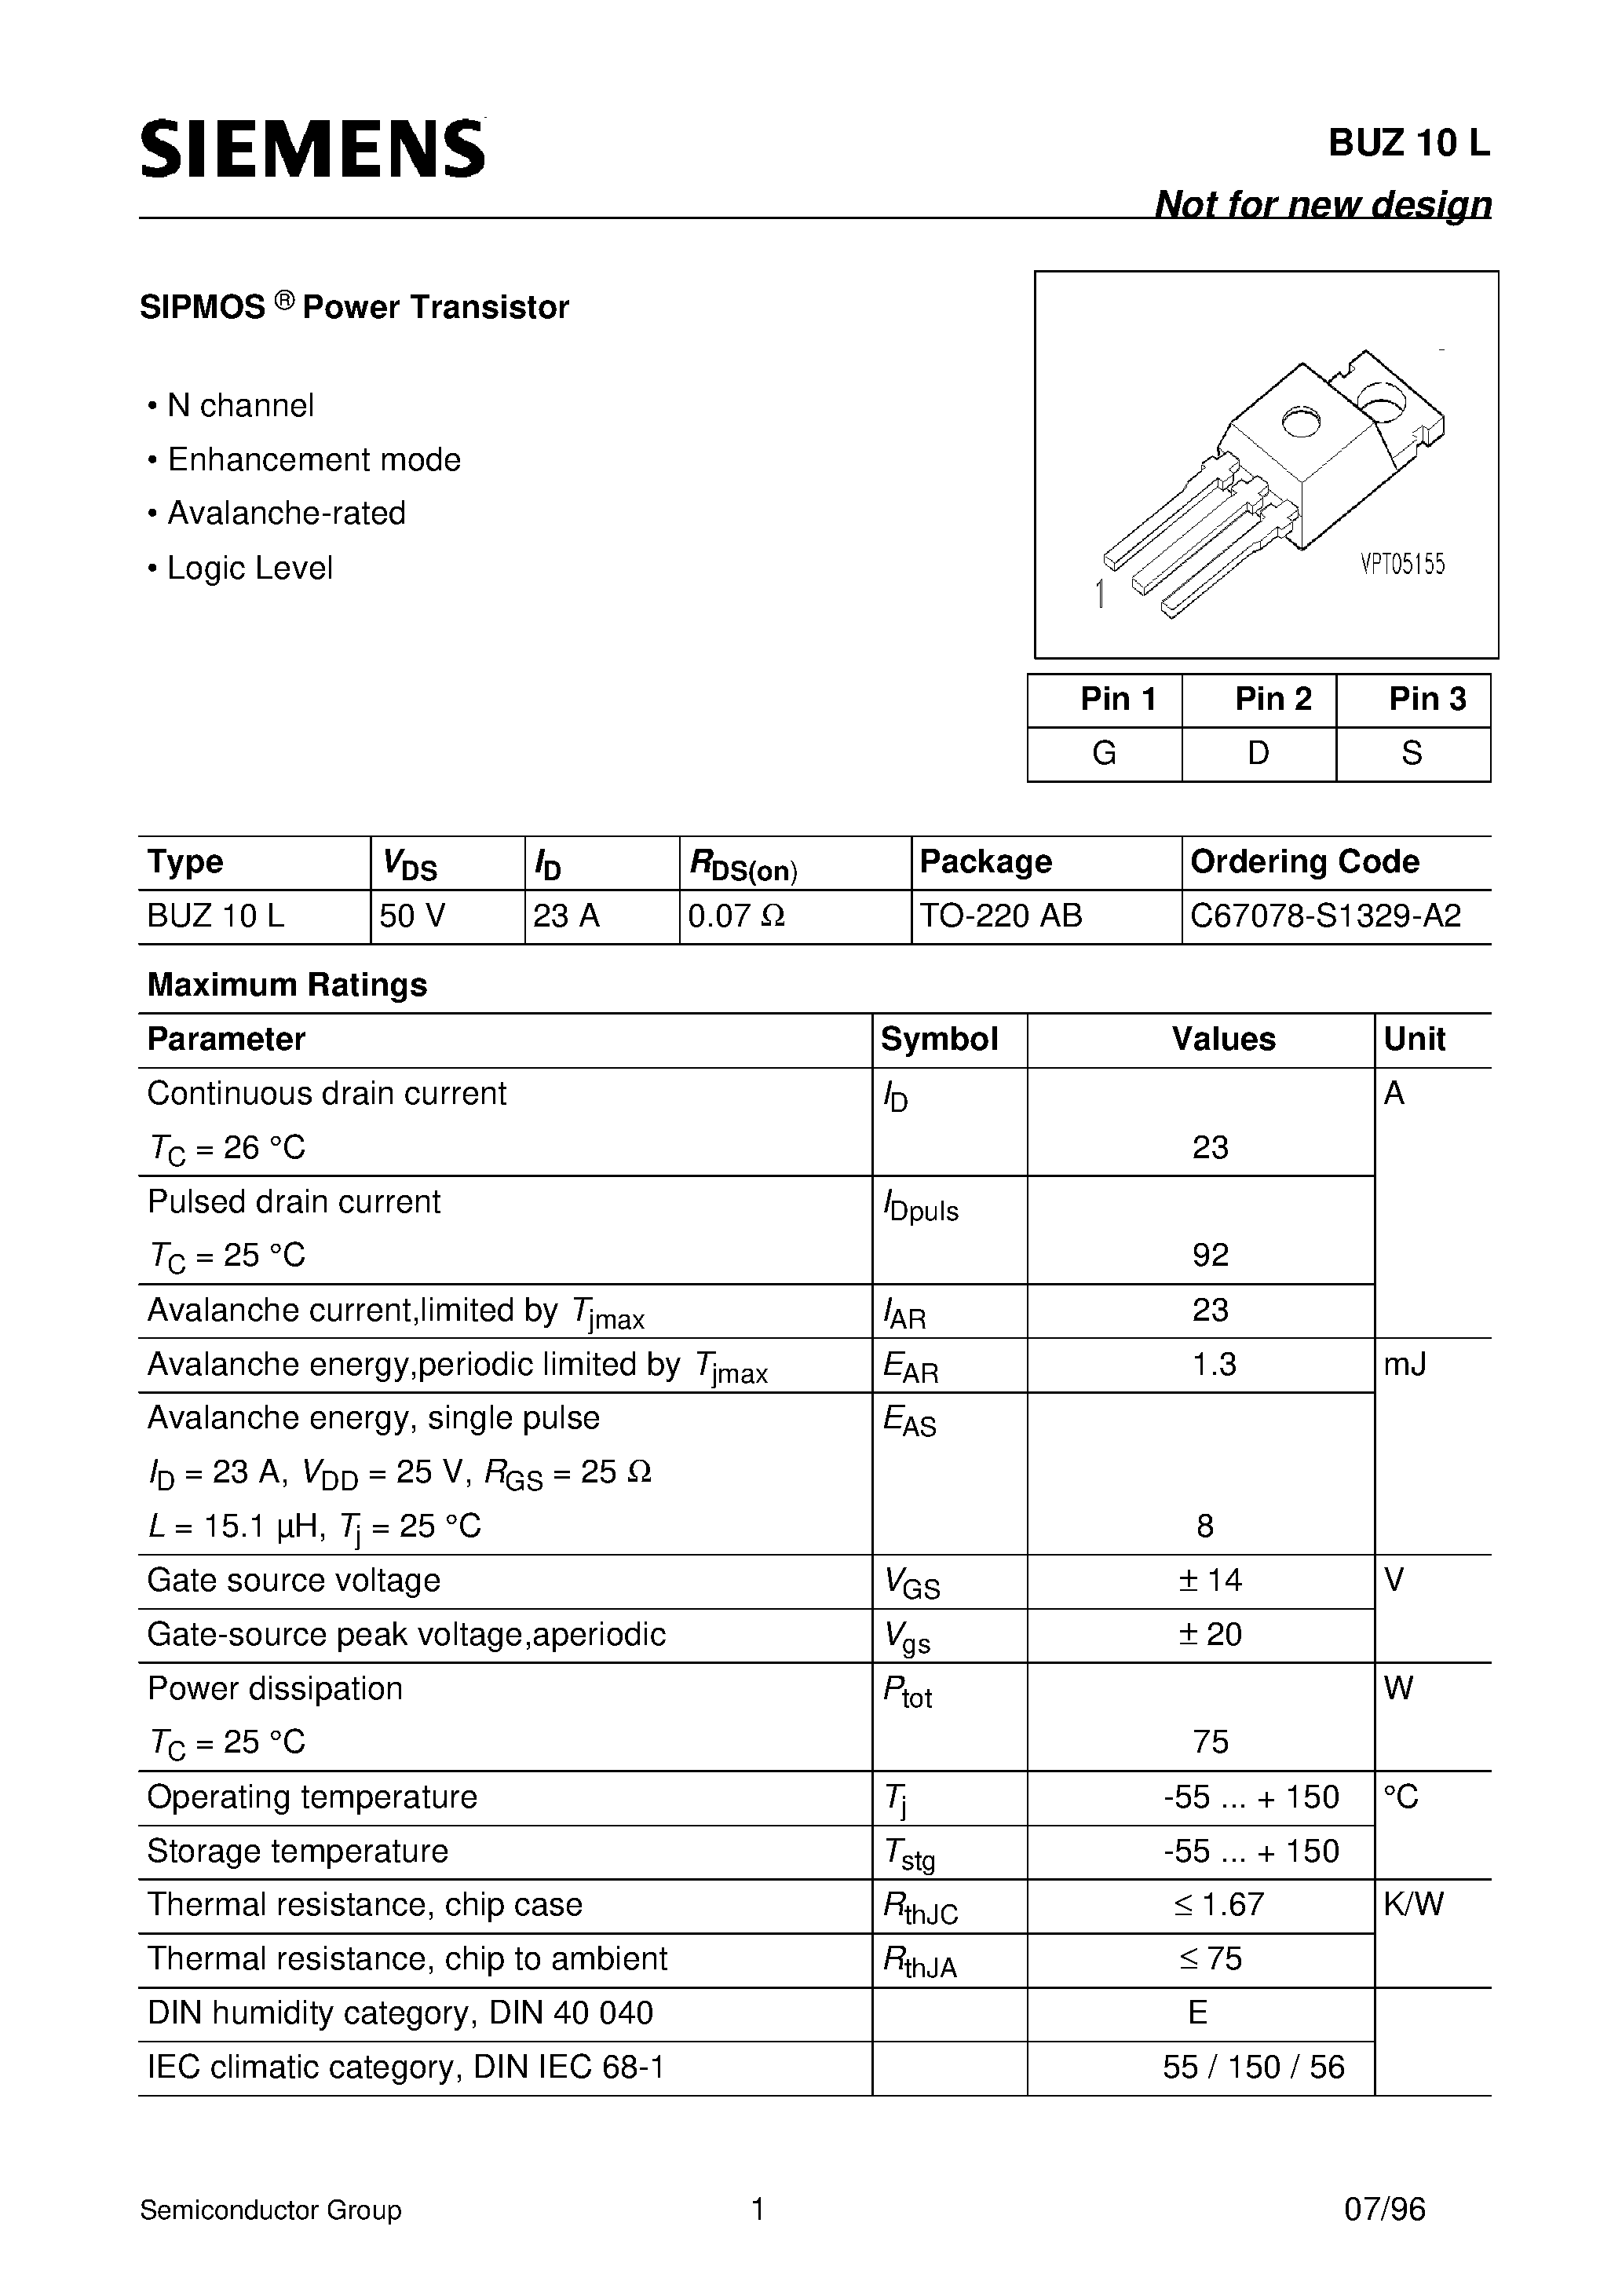 Datasheet BUZ10L - SIPMOS Power Transistor (N channel Enhancement mode Avalanche-rated Logic Level) page 1